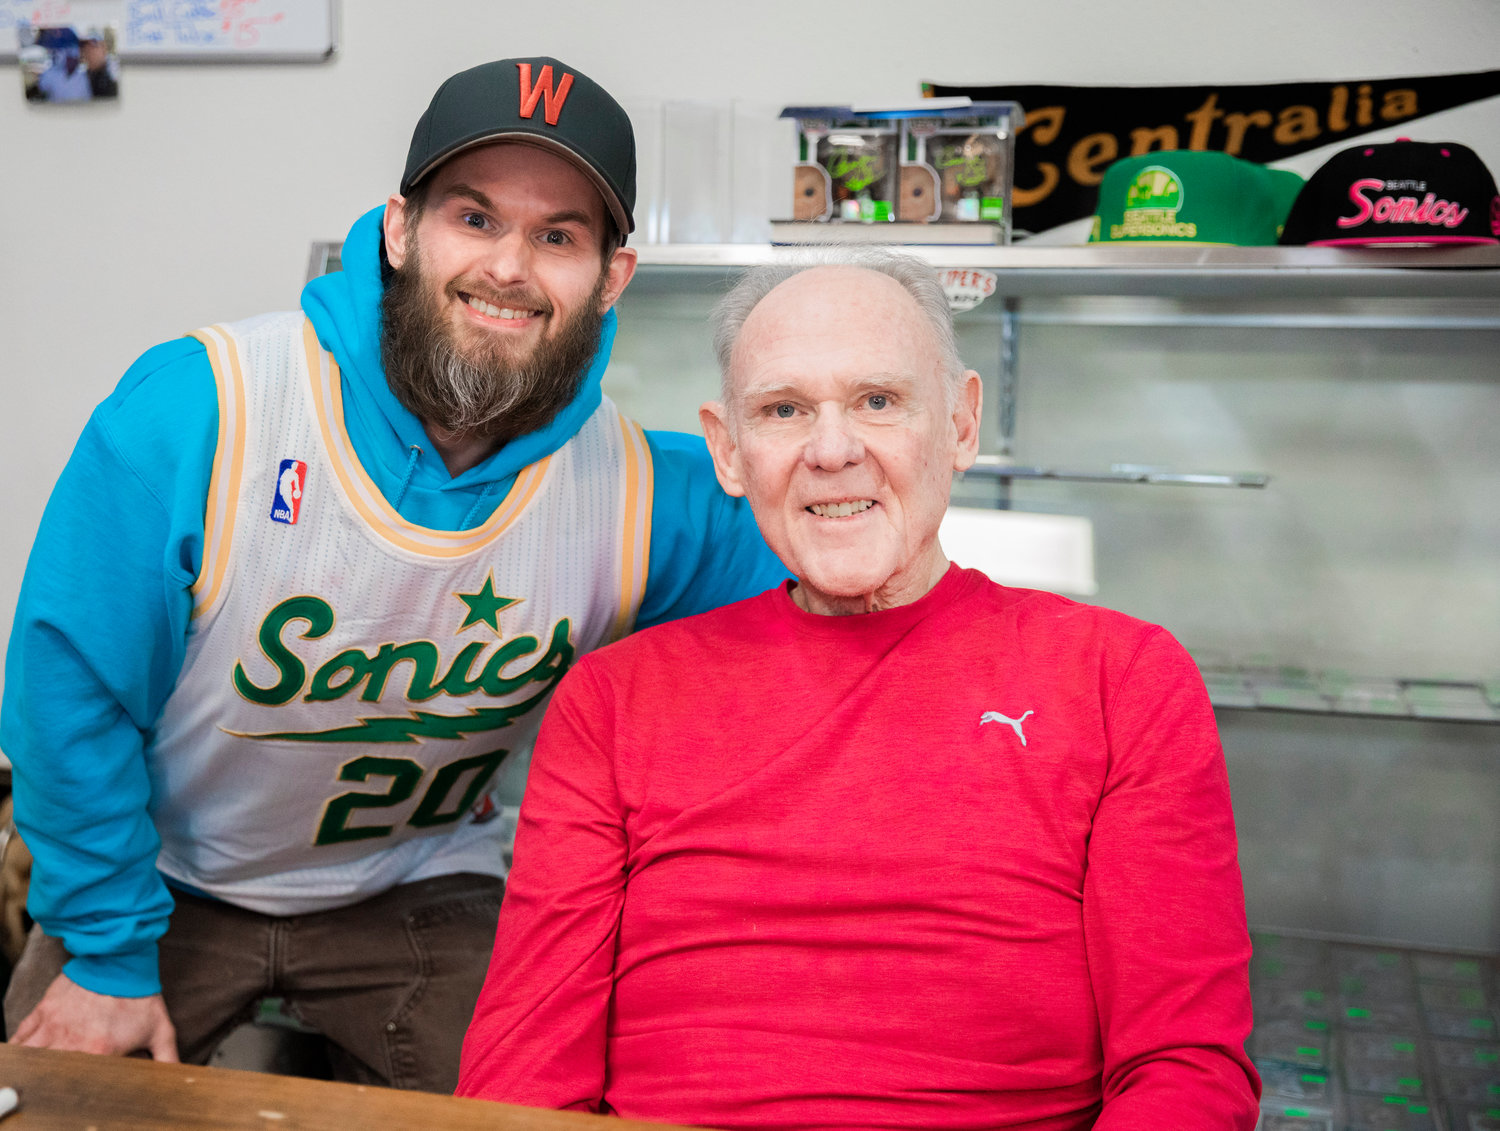 Dan Keiper, owner of Keiper’s Cards, smiles for a photo with former professional basketball player and coach George Karl on Friday in downtown Centralia.